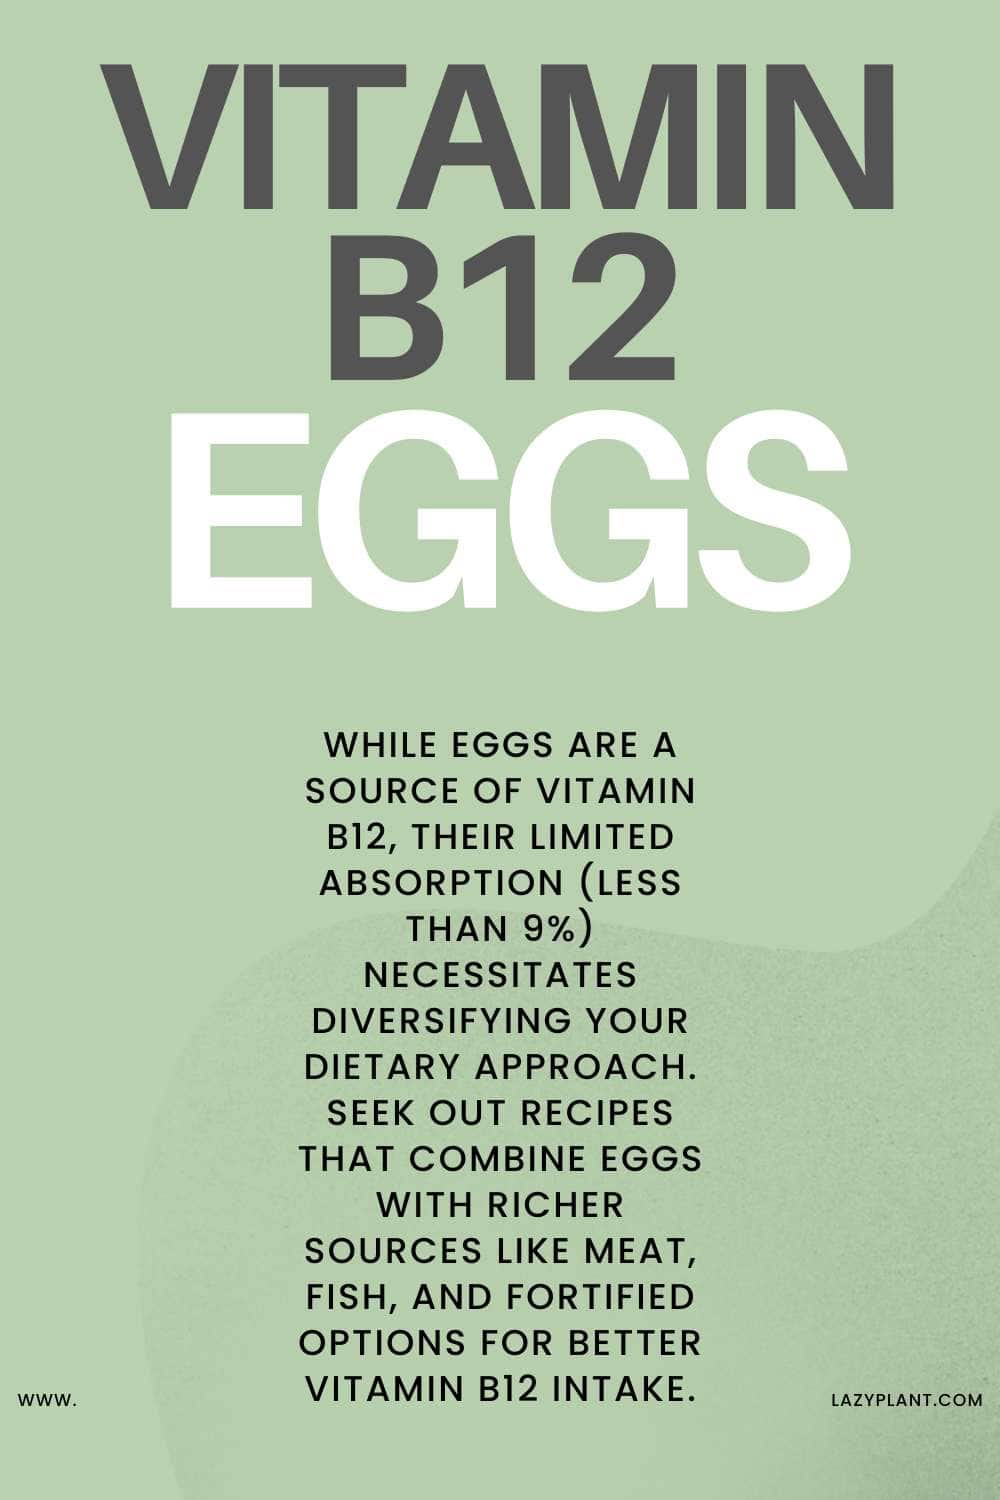 Are Eggs the richest food in Vitamin B12?